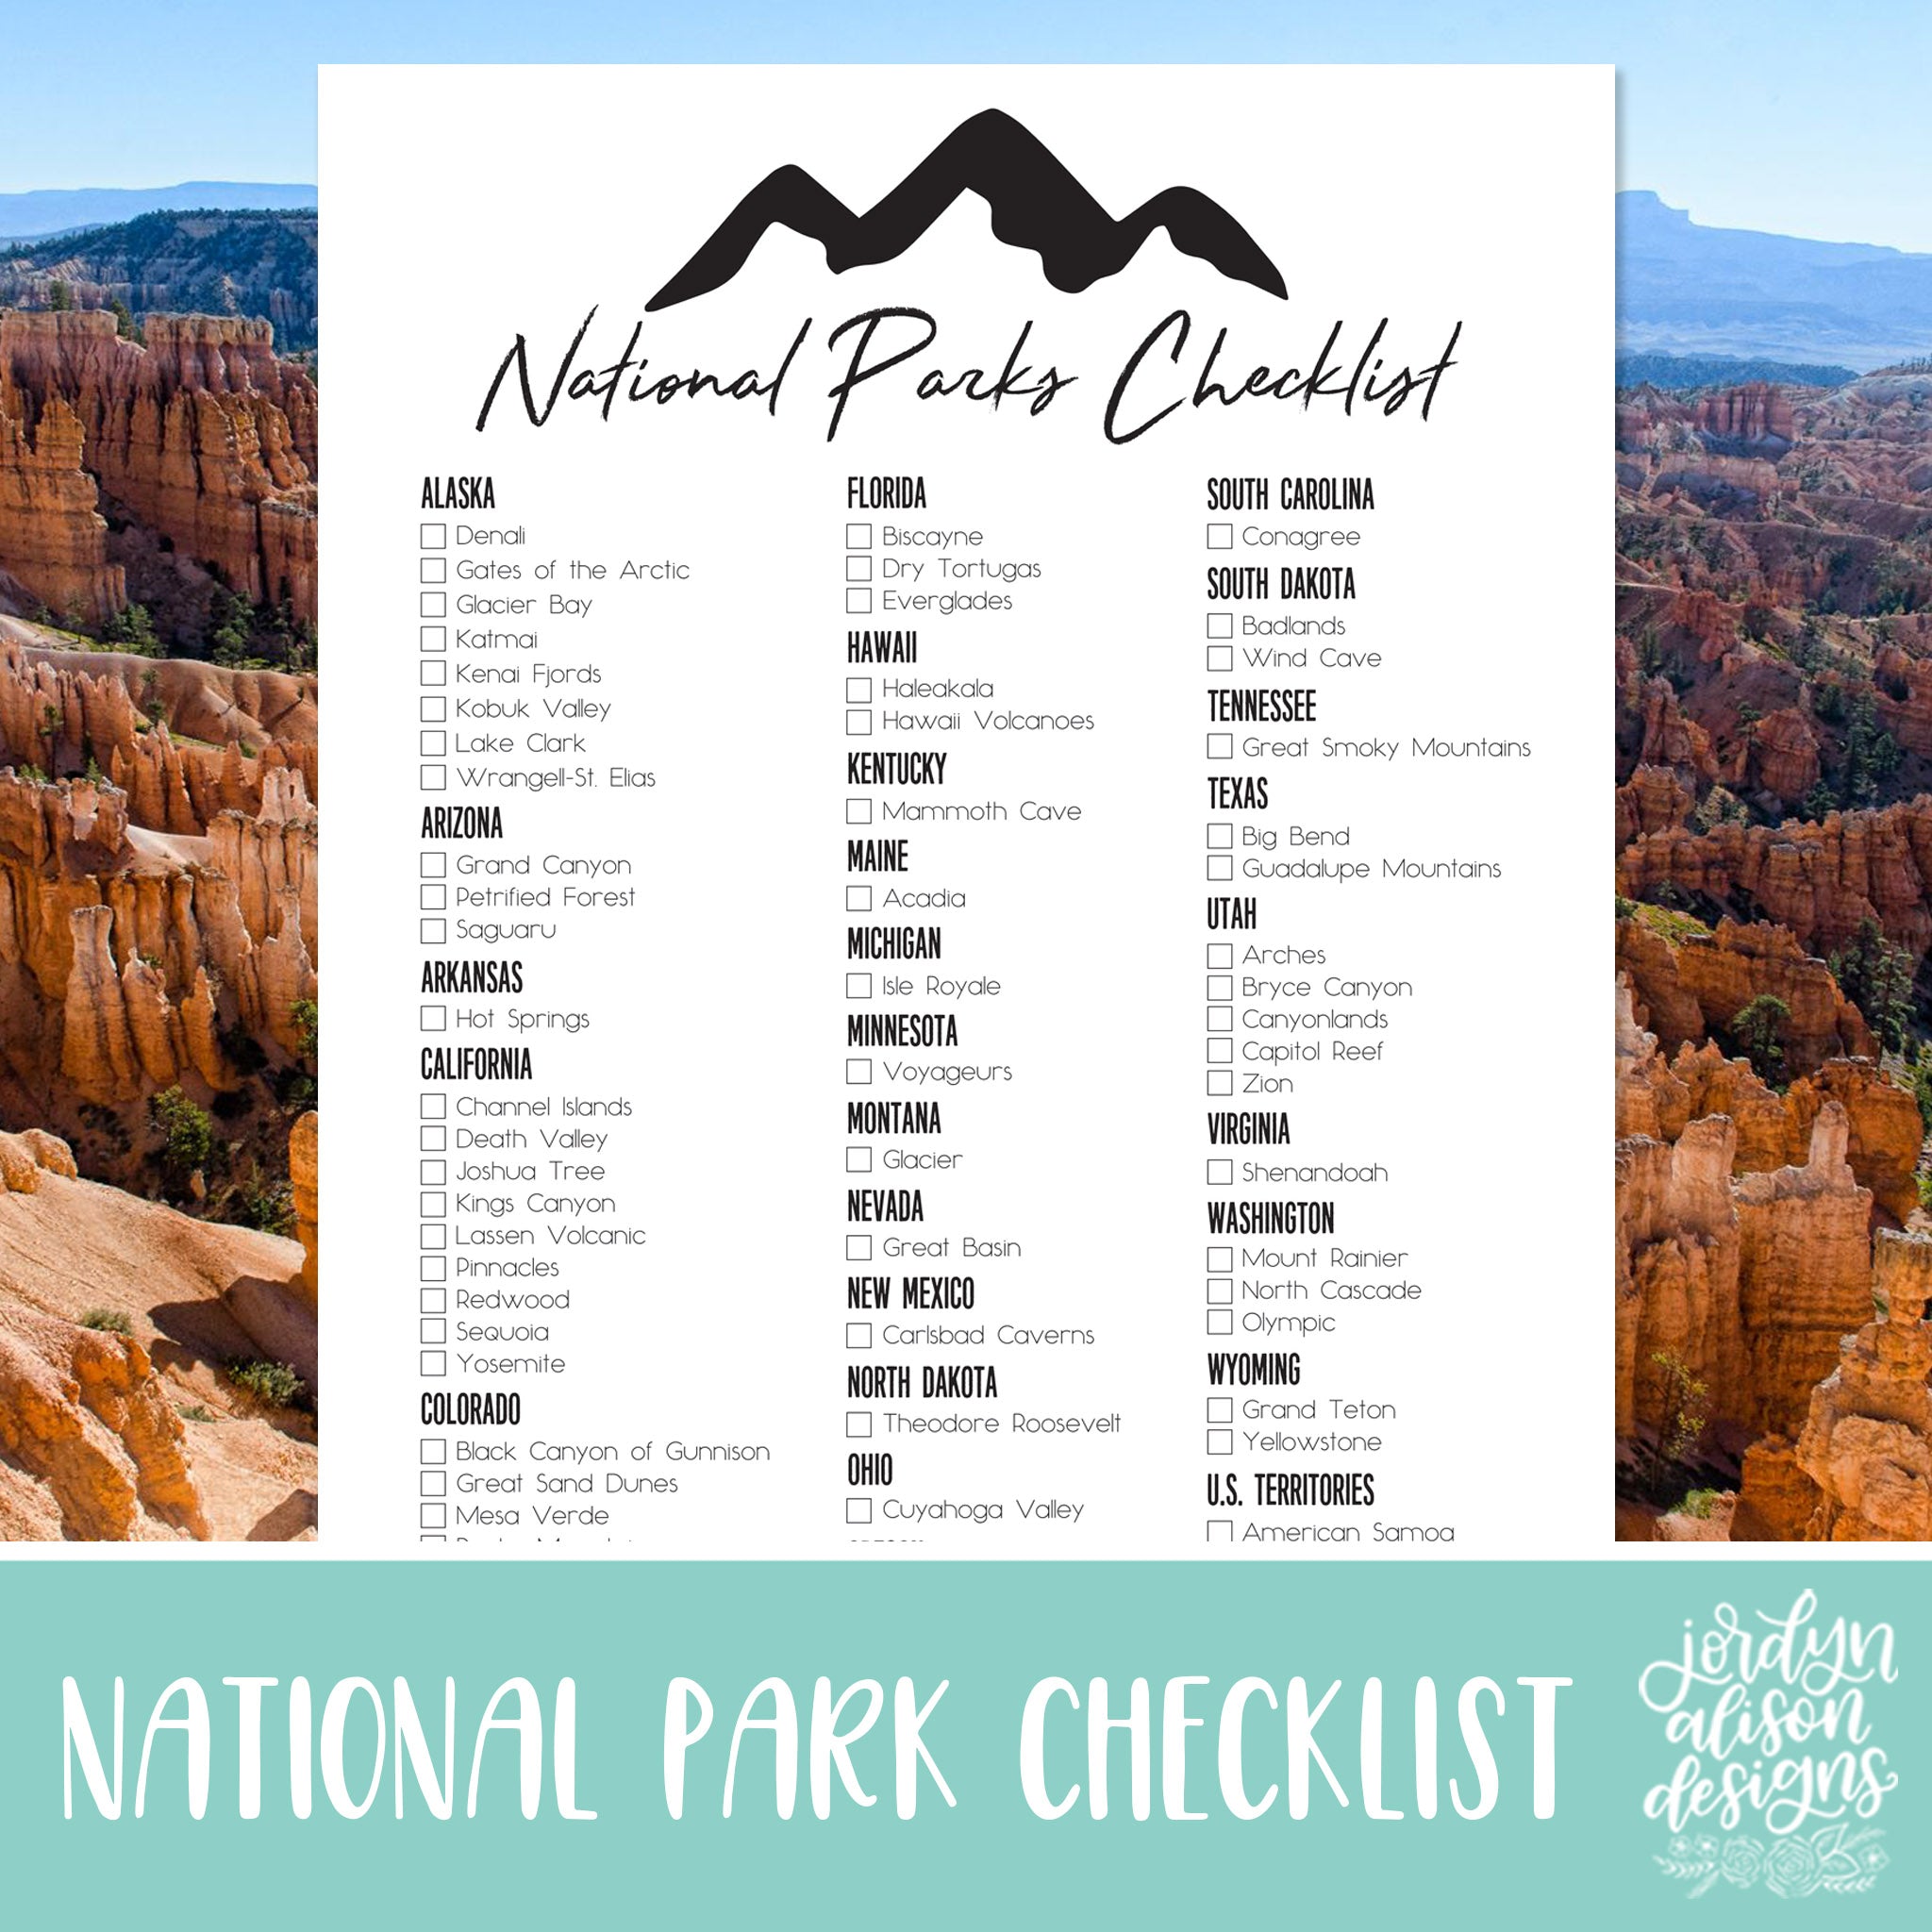 Download your National Parks Checklist today to keep track of what parks you have yet to visit! 